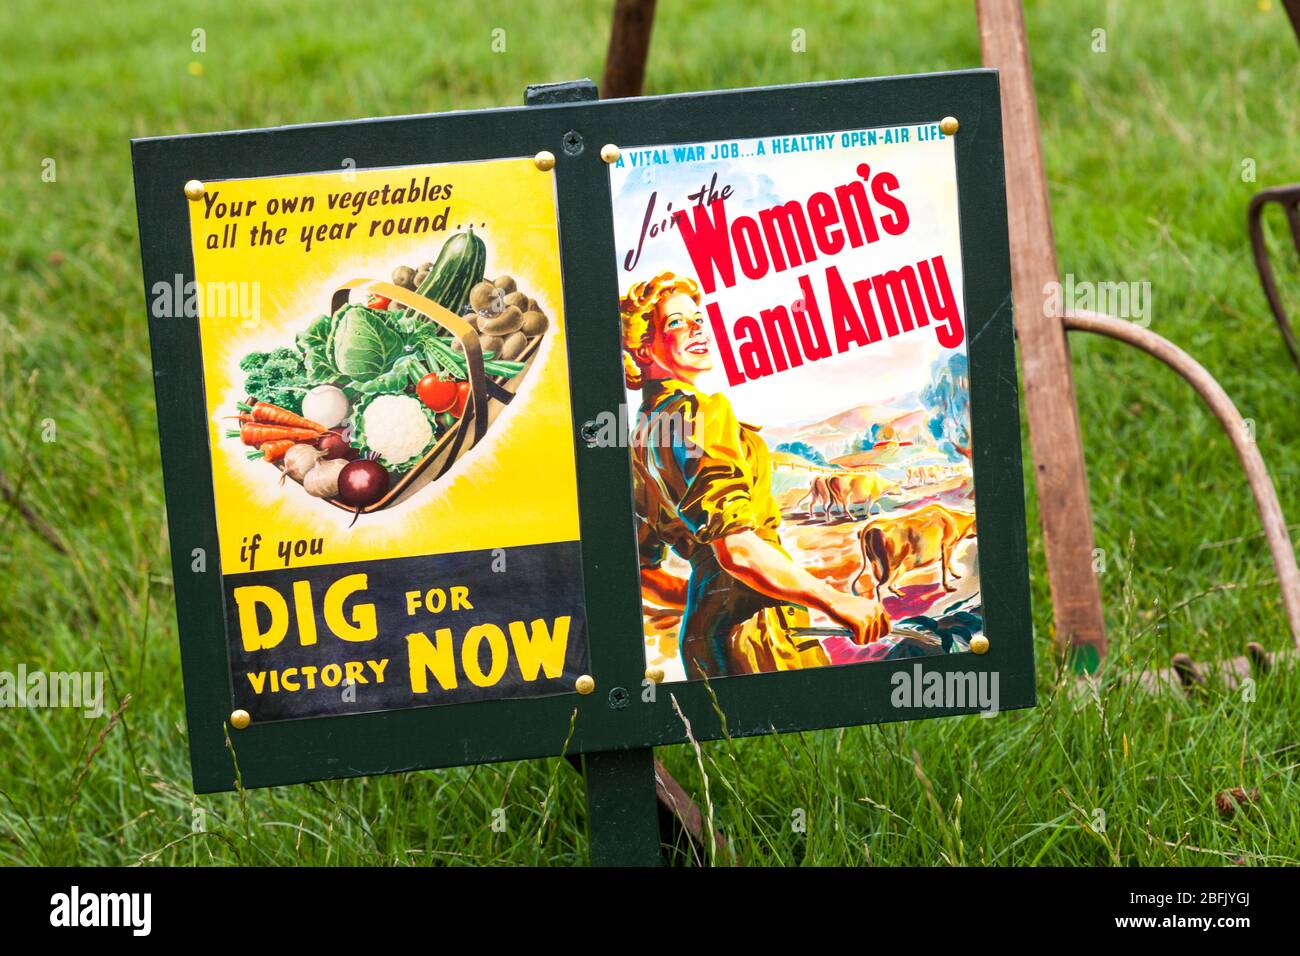 A Women's Land Army sign at a country show in the U.K. Stock Photo